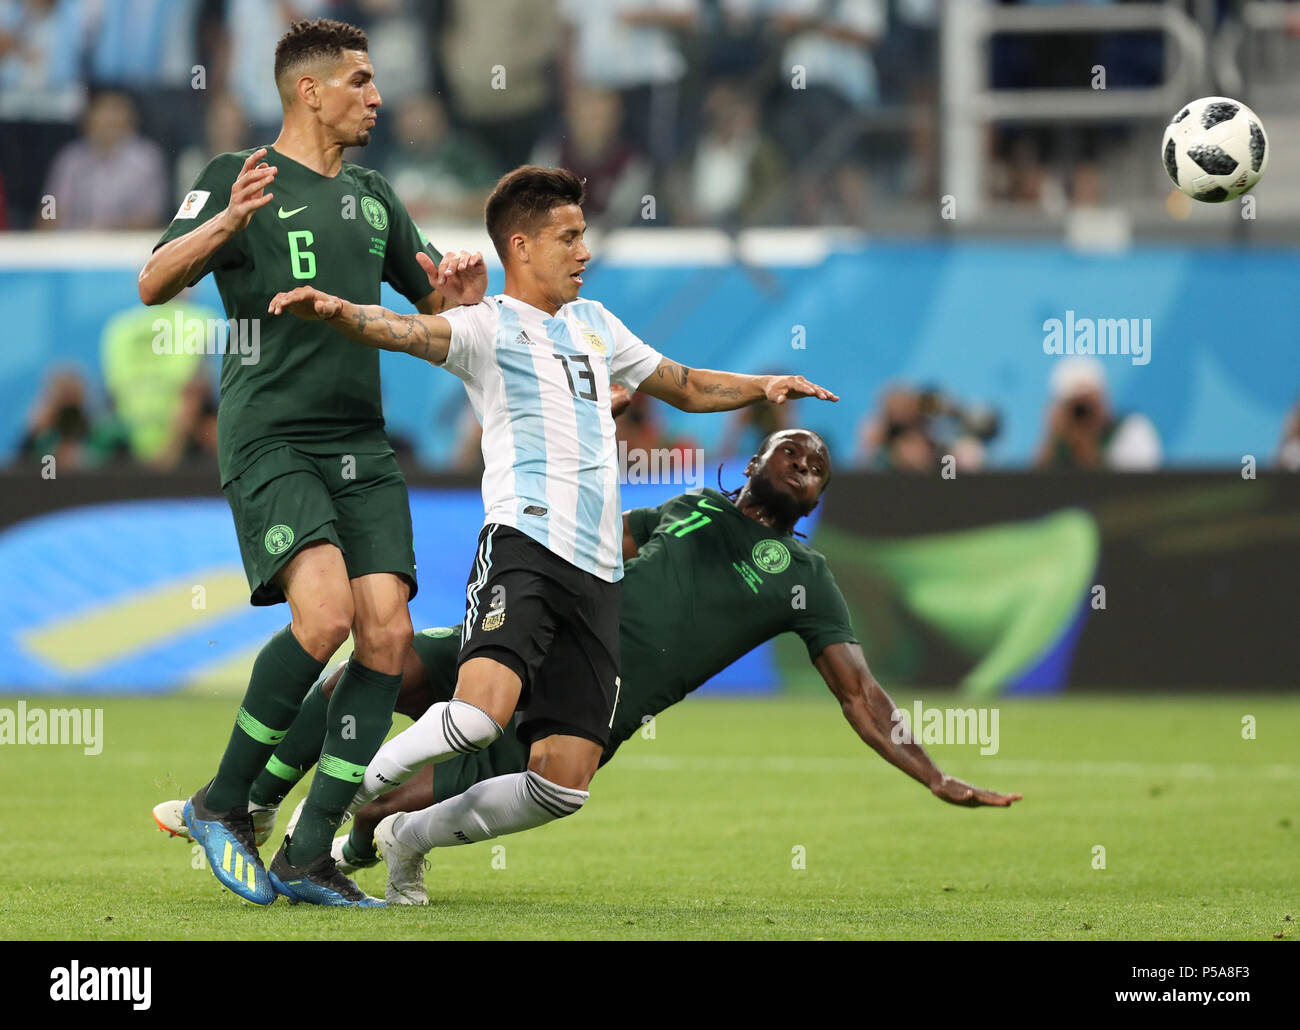 Saint Petersburg, Russia. 26th June, 2018. Victor Moses (R) of Nigeria vies with Maximiliano Meza (C) of Argentina during the 2018 FIFA World Cup Group D match between Nigeria and Argentina in Saint Petersburg, Russia, June 26, 2018. Argentina won 2-1 and advanced to the round of 16. Credit: Yang Lei/Xinhua/Alamy Live News Stock Photo